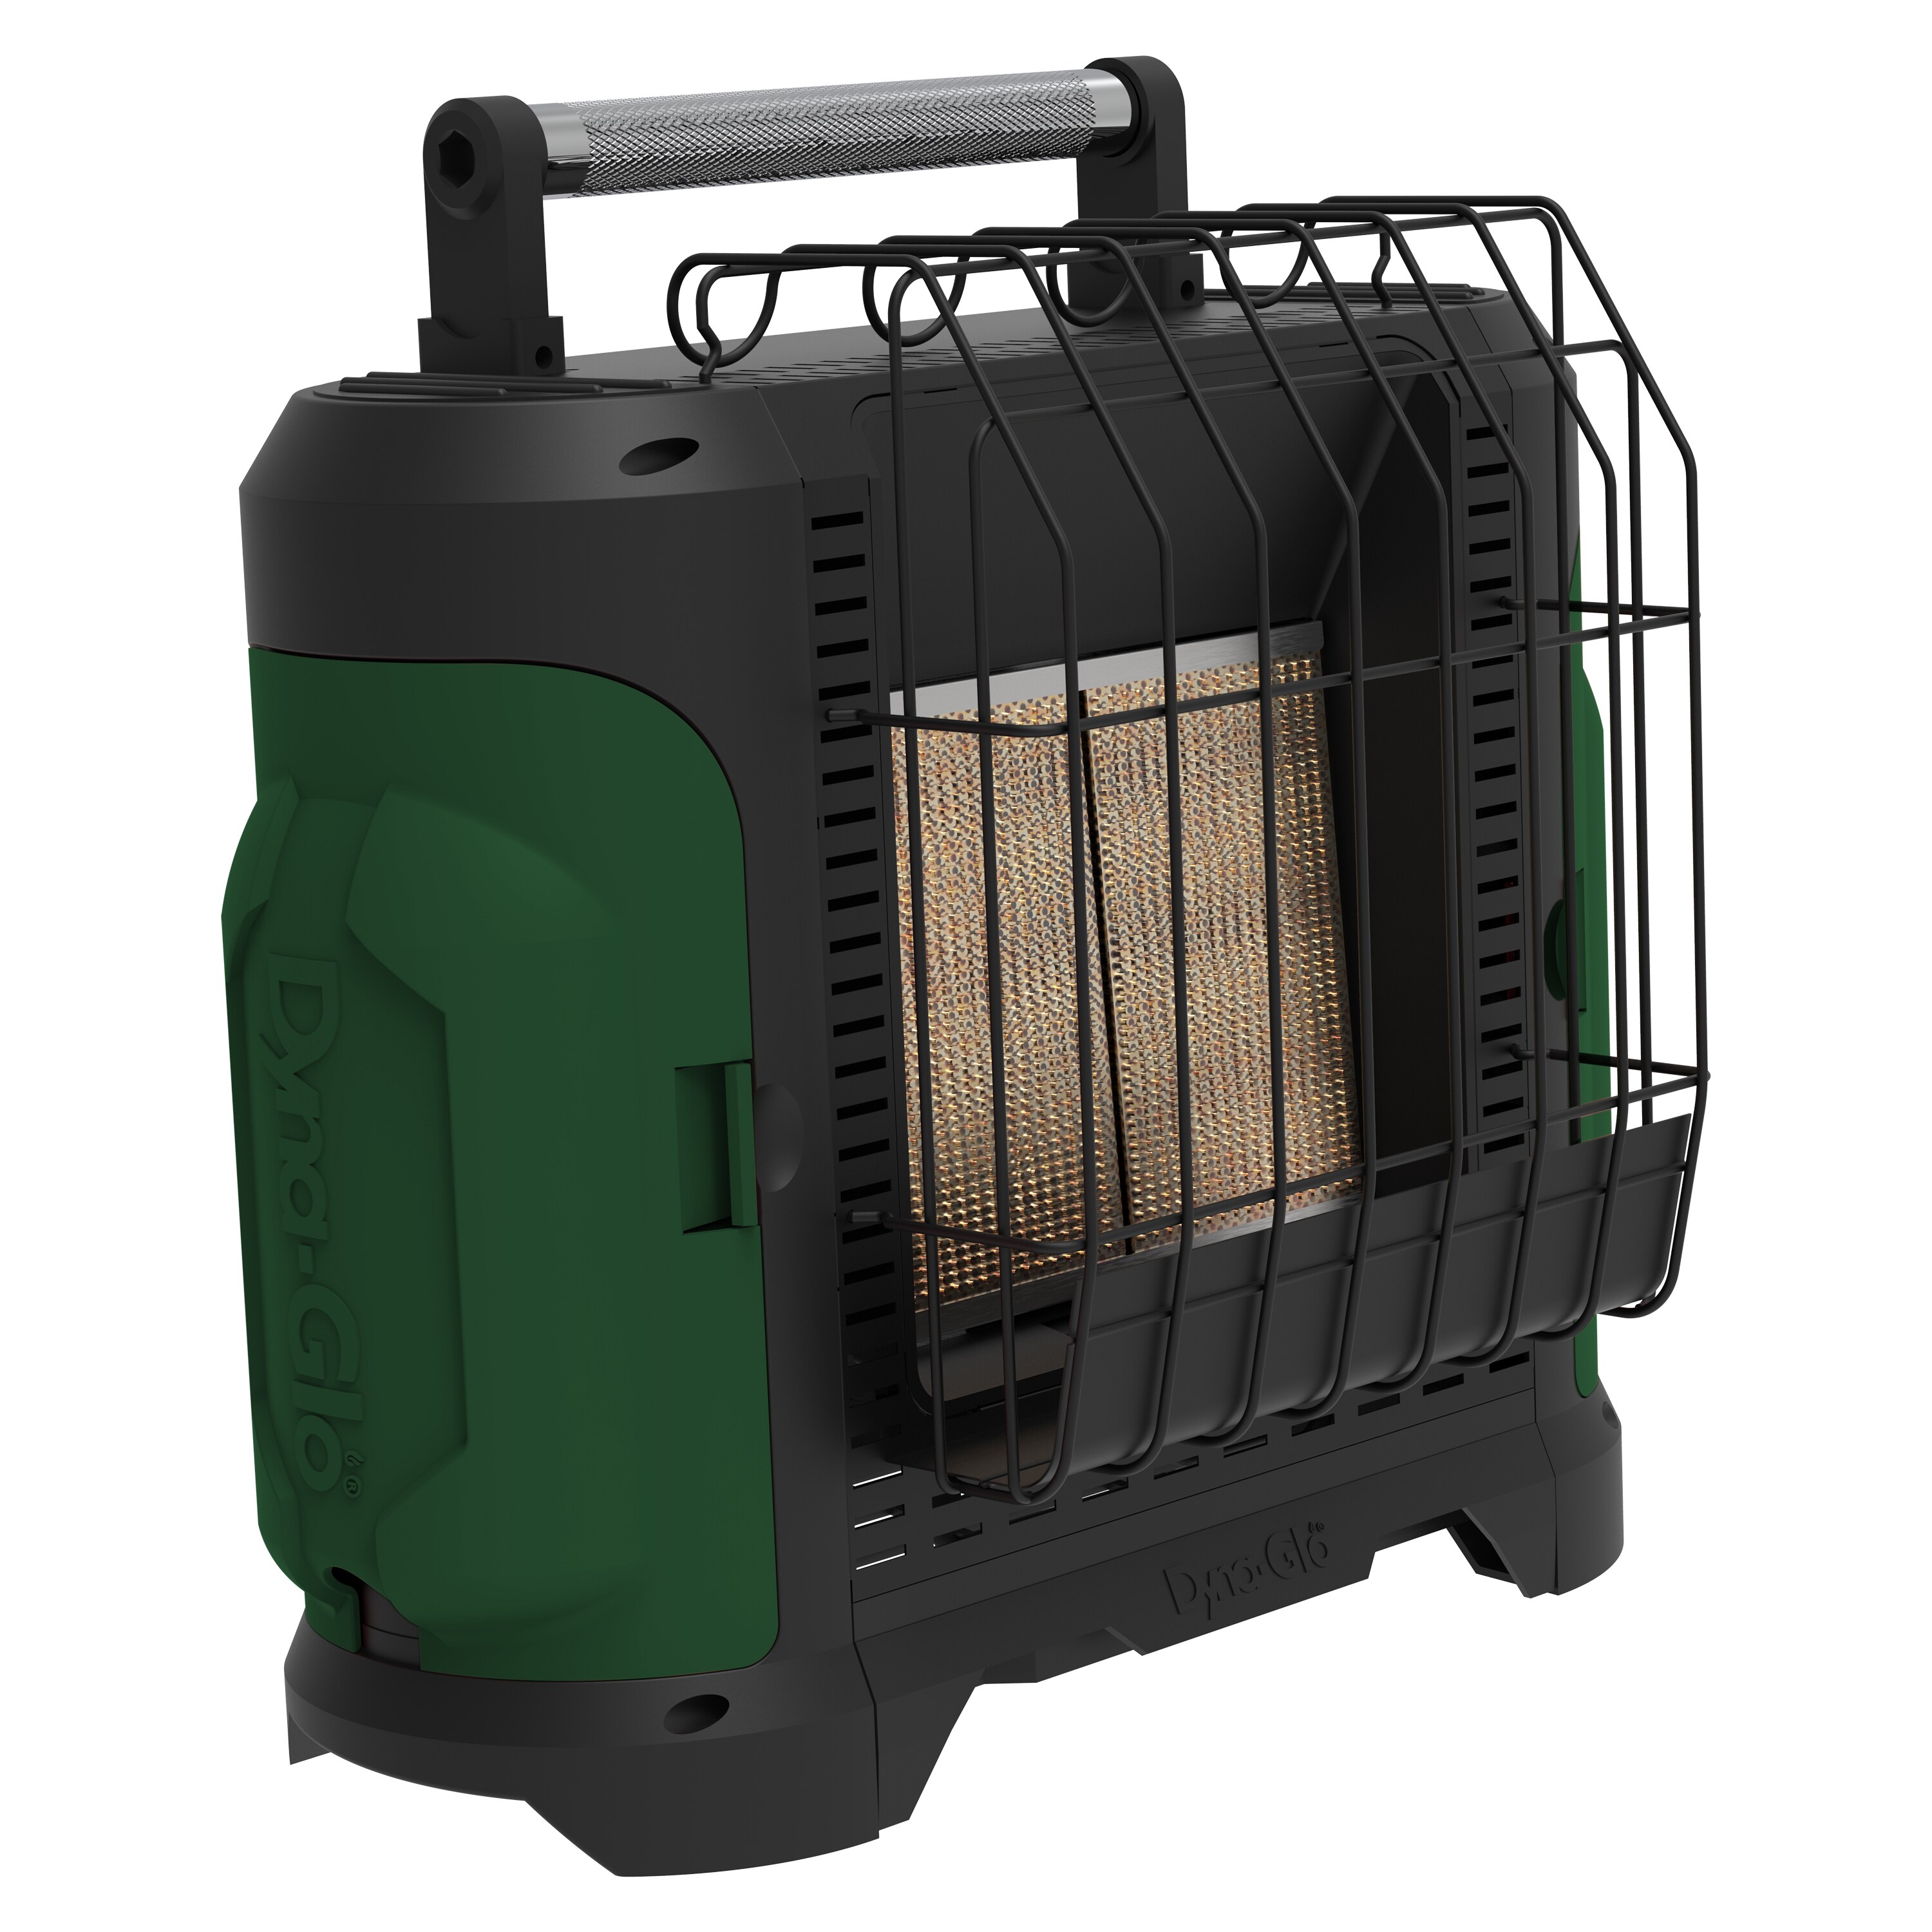 Dyna-Glo Portable Space Heater 18K BTU Propane Gas Cabinet Shop Indoor Safe New 